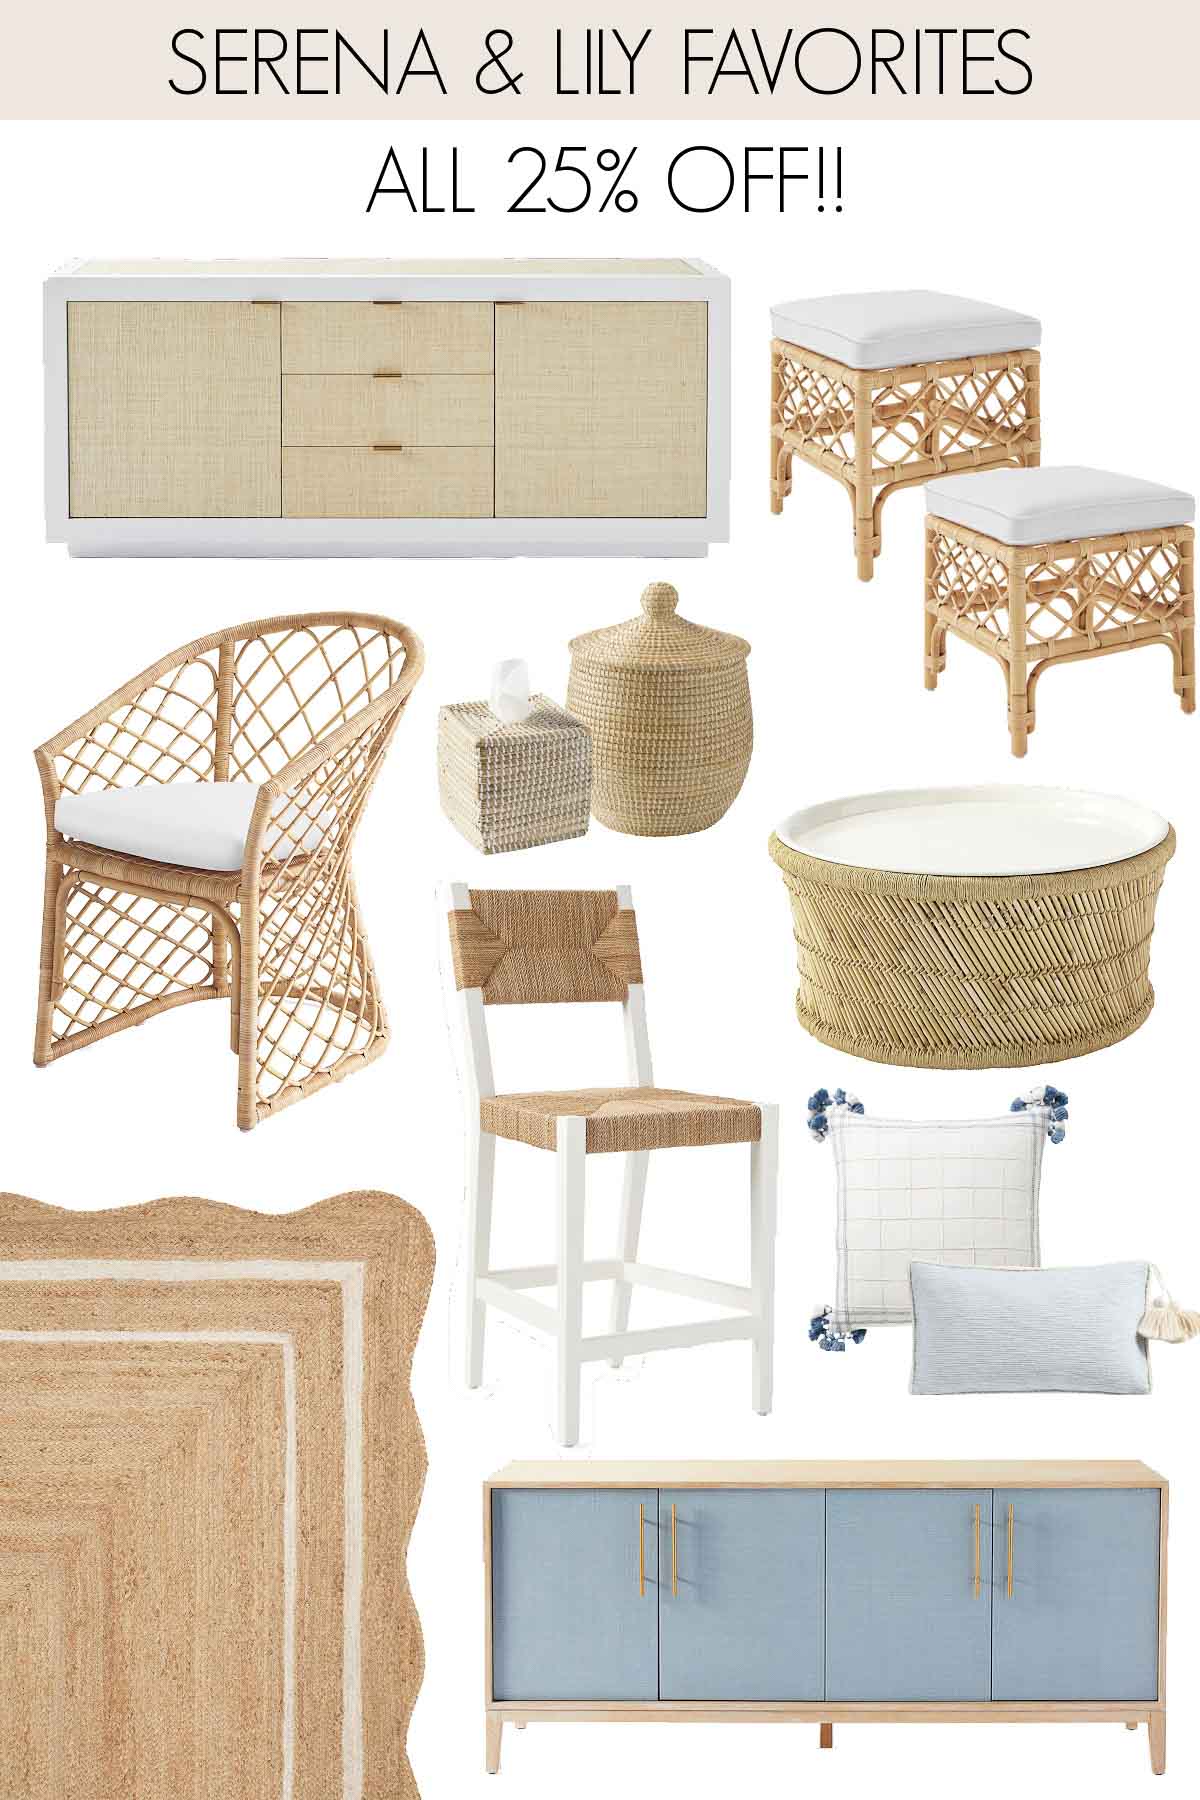 Serena & Lily furniture pieces